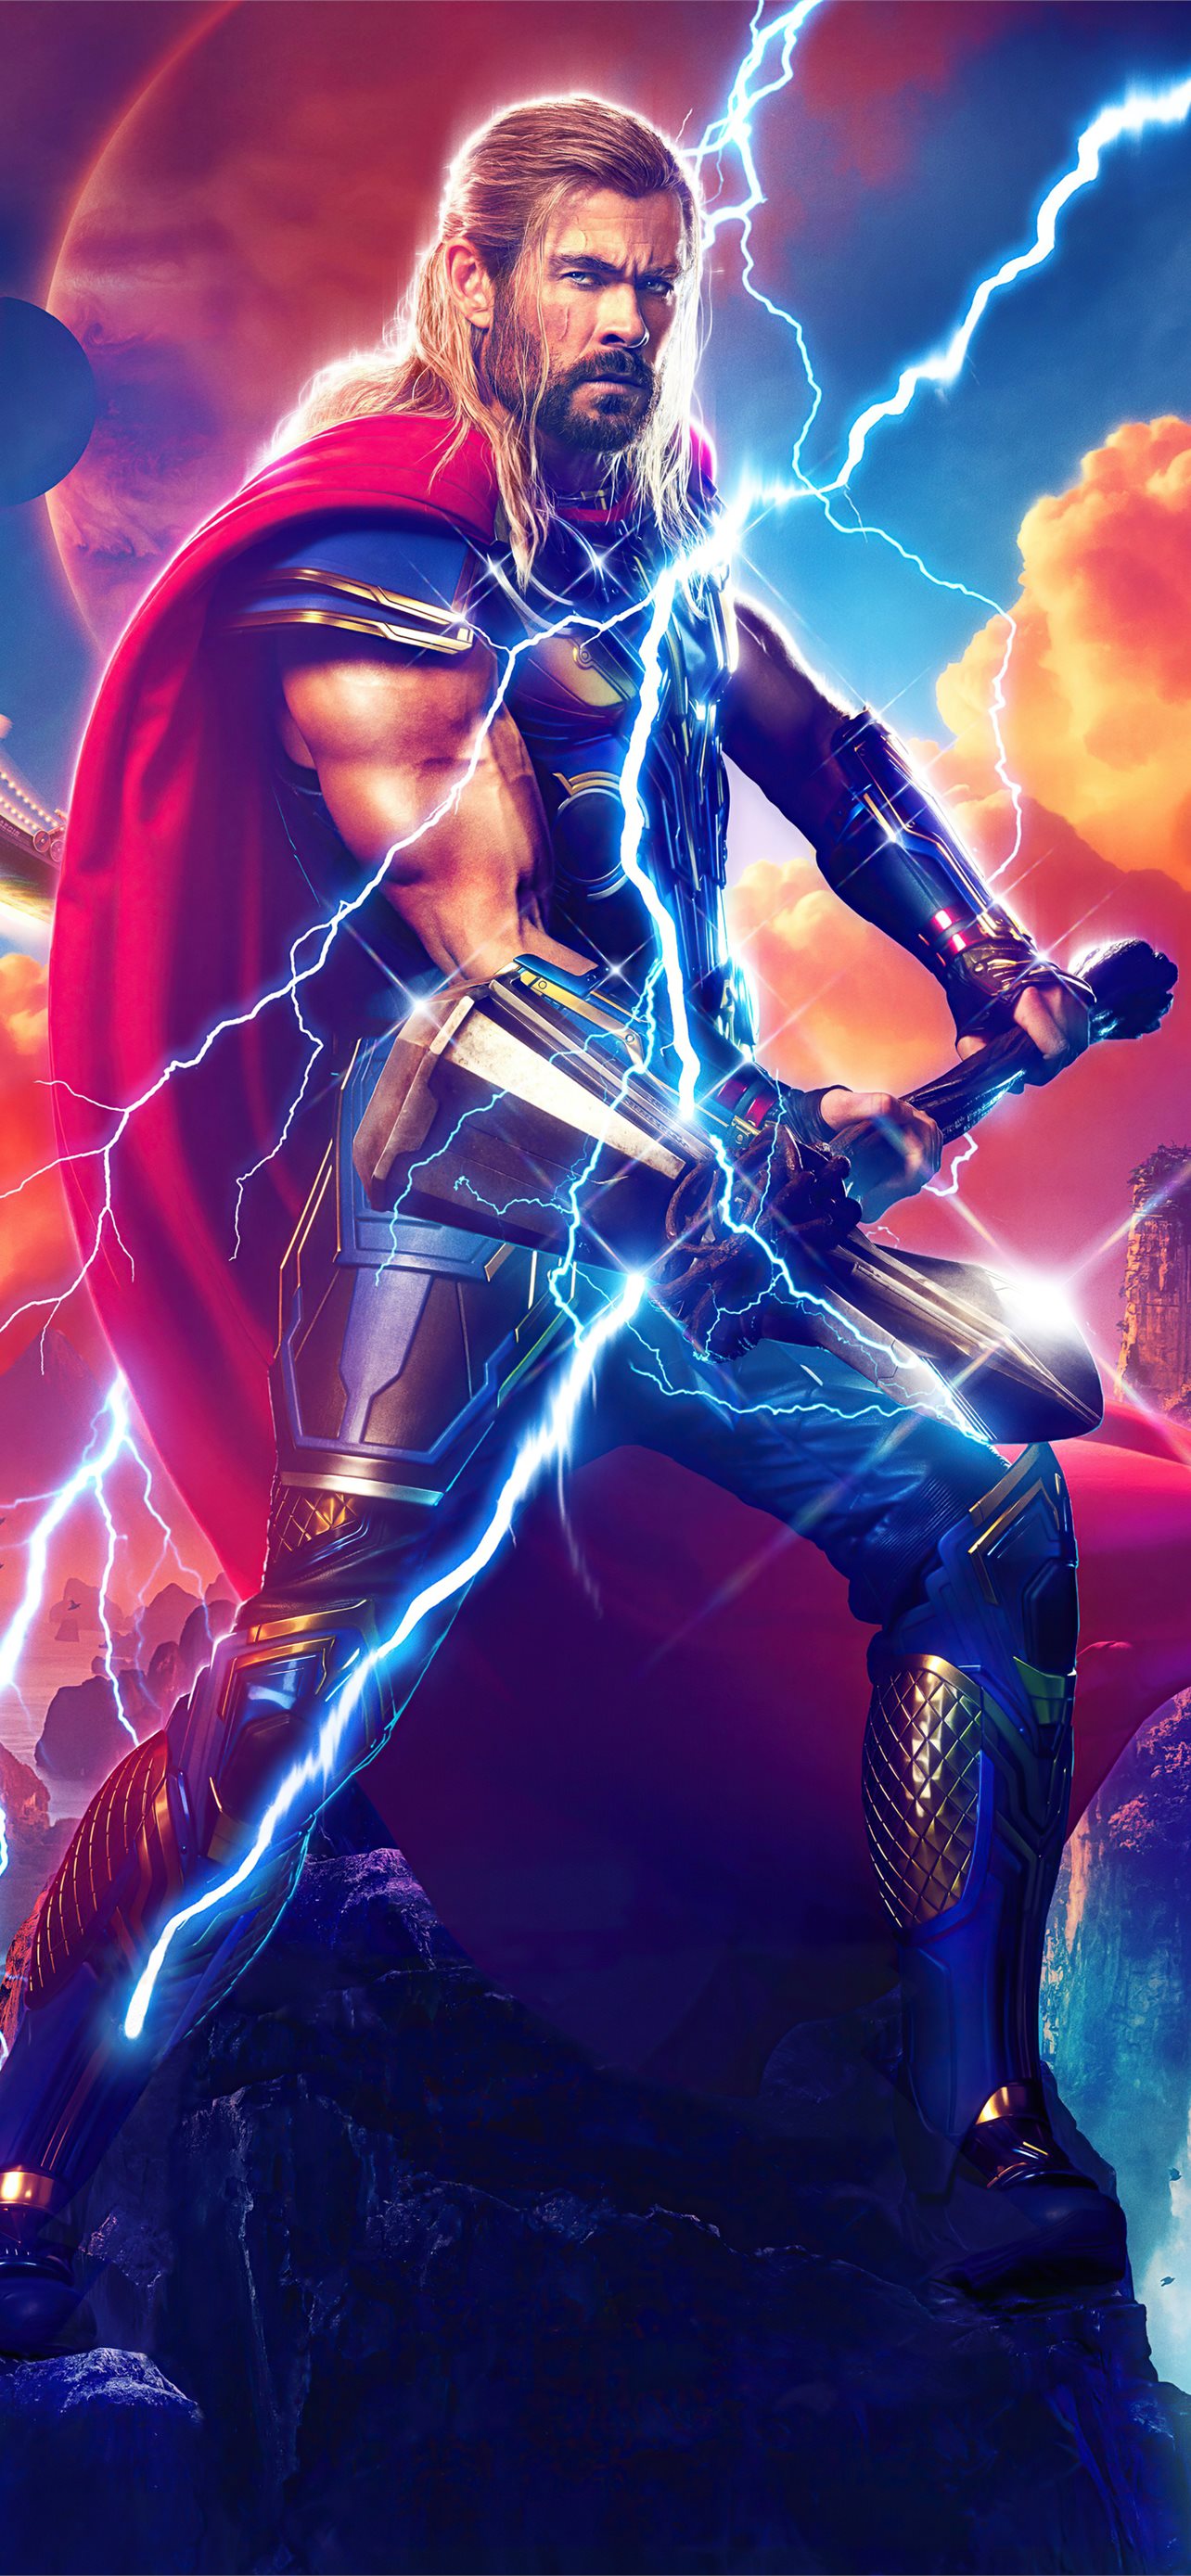 3D Parallax Live Wallpaper -HD Animated Background Apk Download for  Android- Latest version 0.0.6- dc.thor .spiderman.superhero.marvel.batman.superman